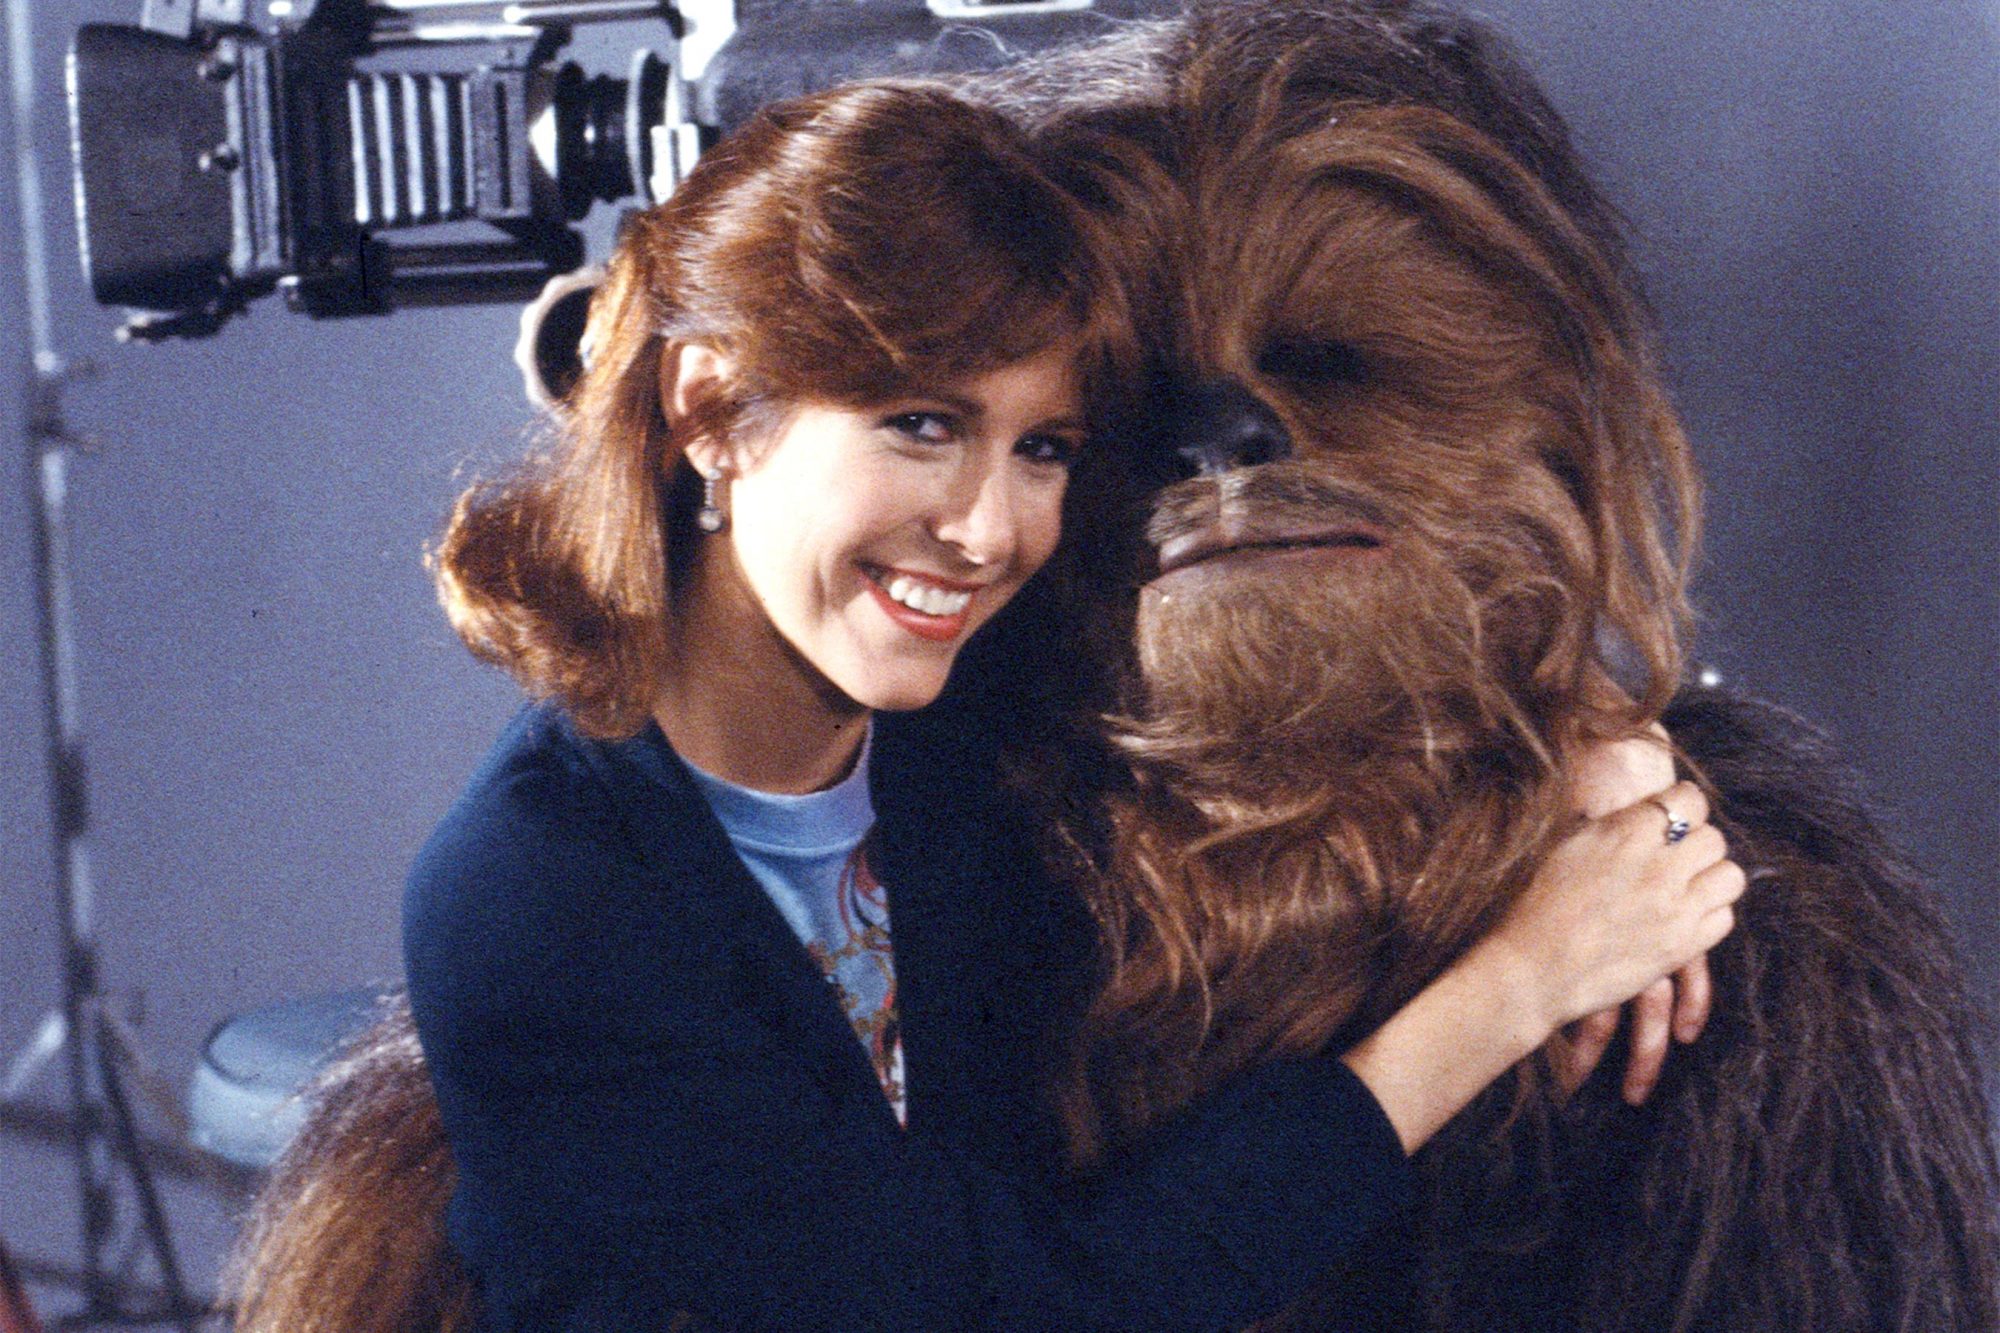 Peter Mayhew and Carrie Fisher